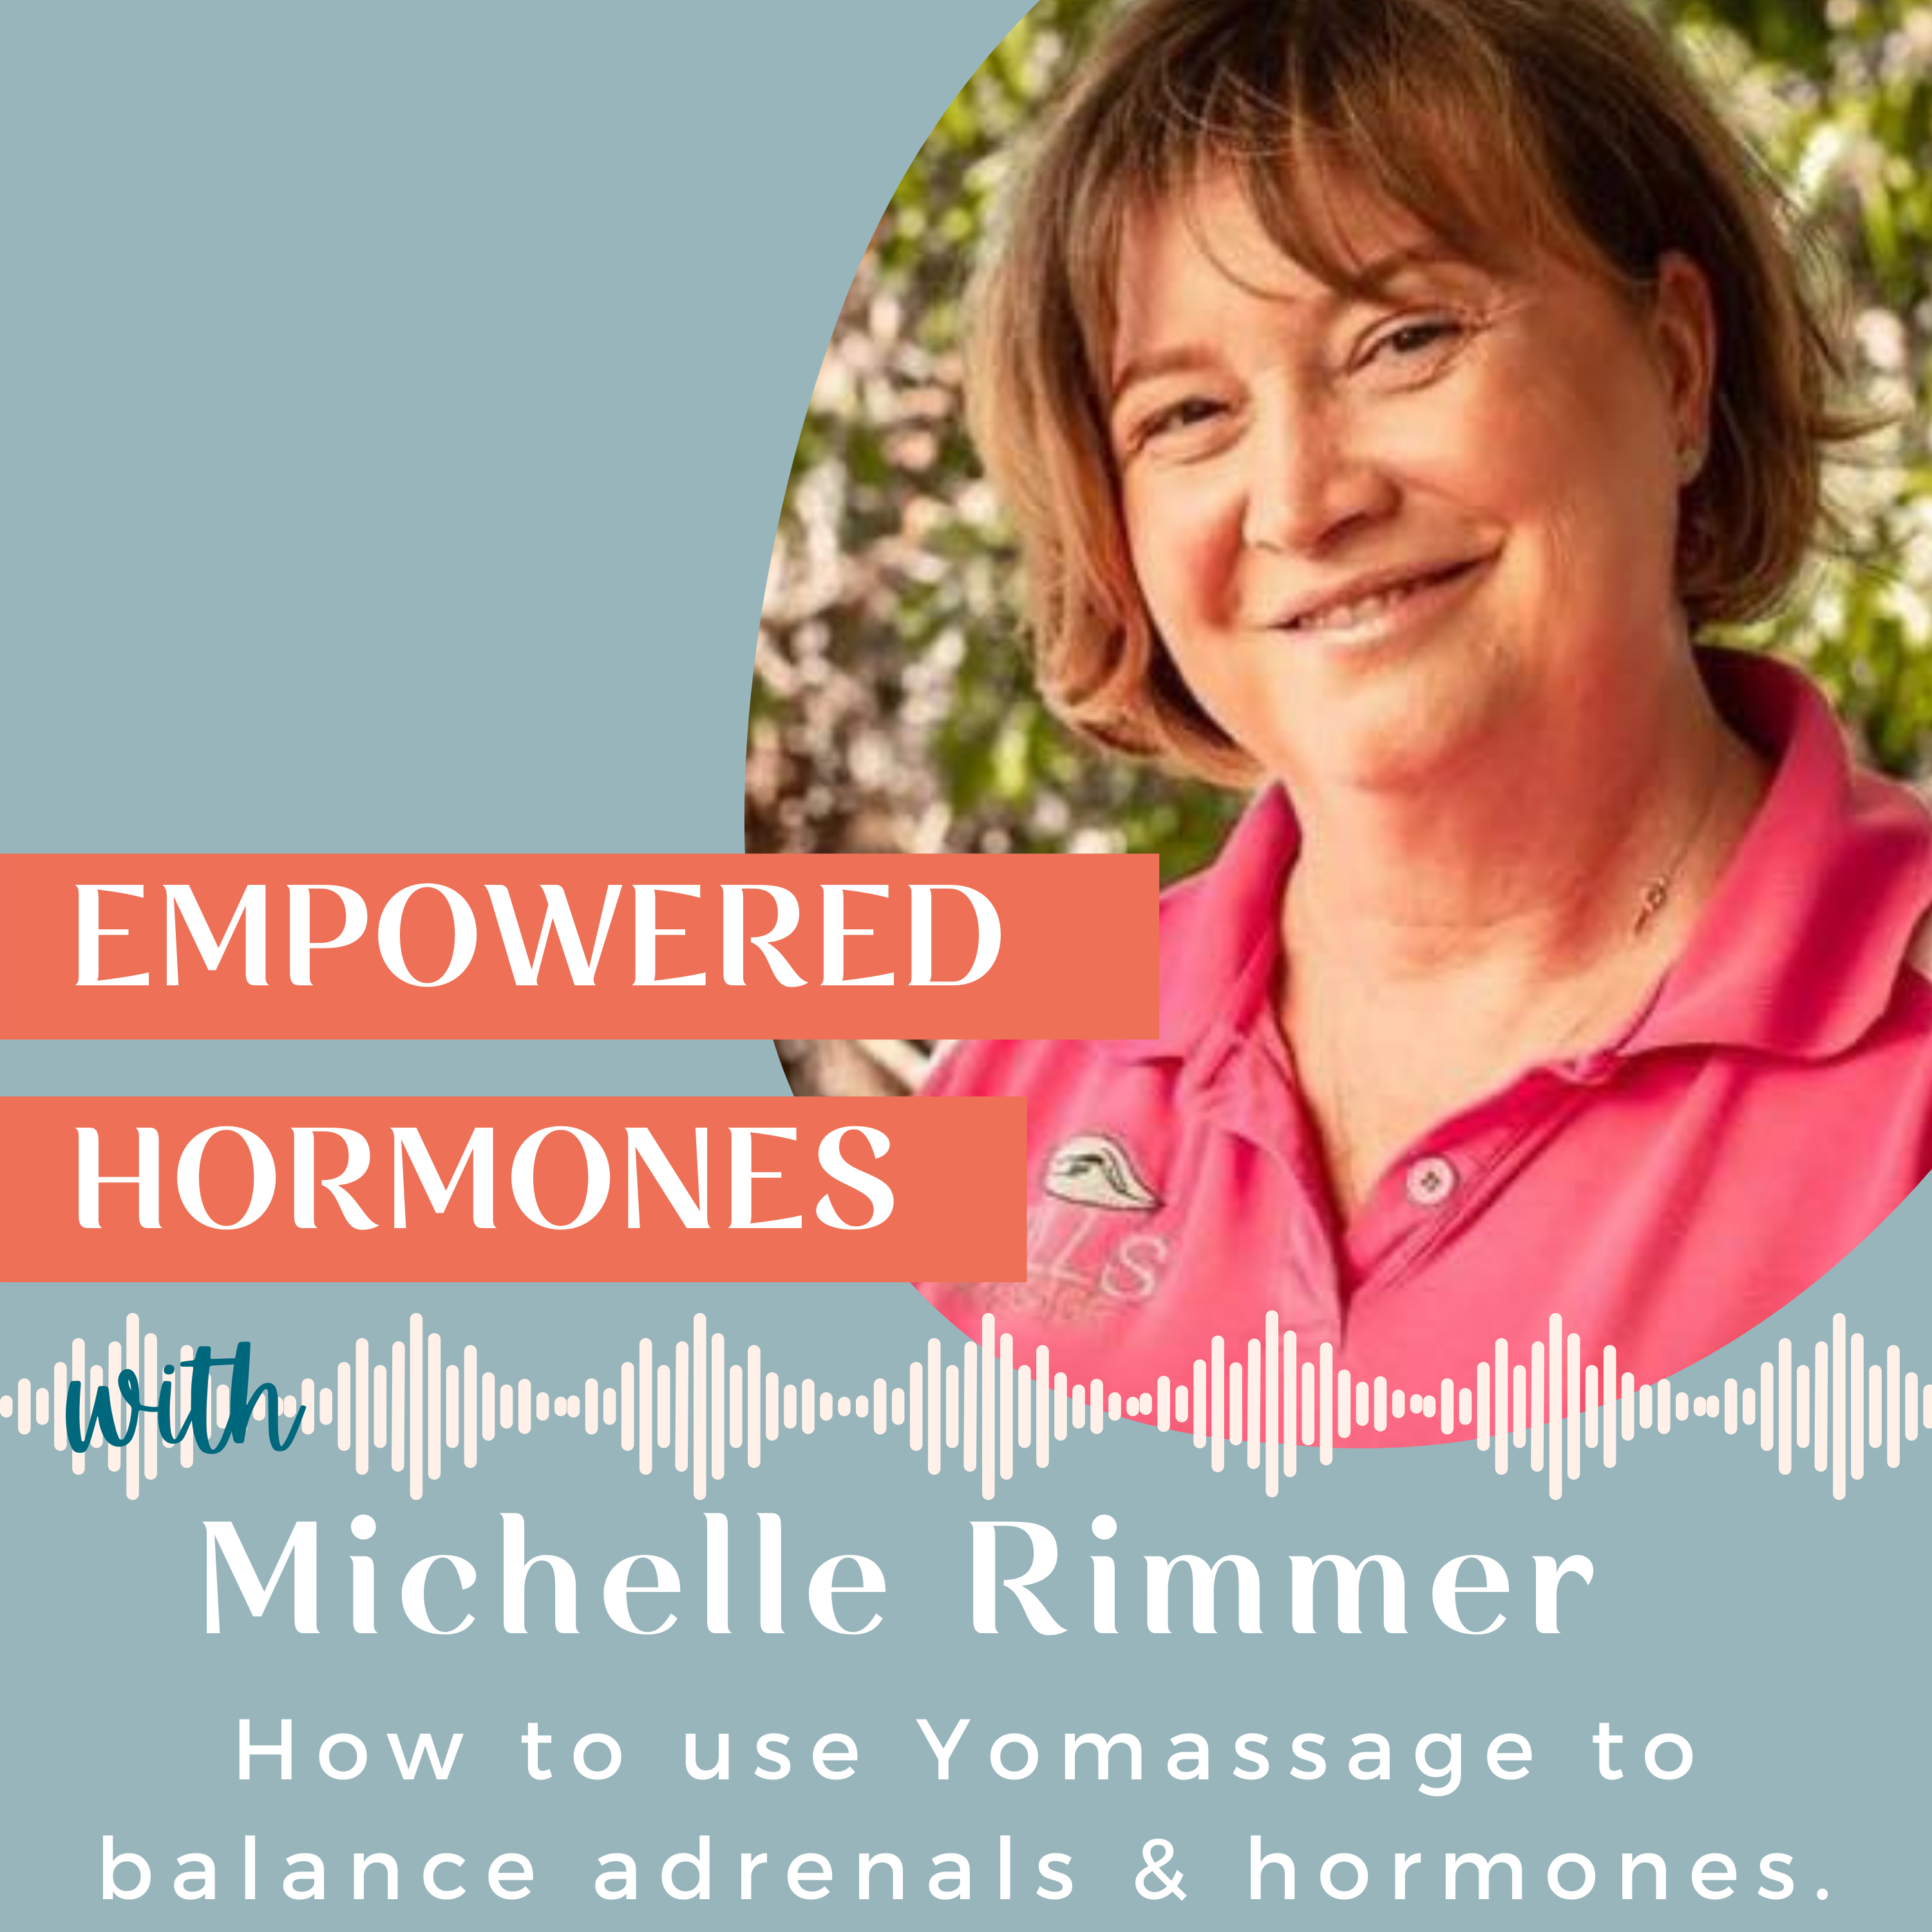 #22 Adrenal health | How to use Yomassage to balance adrenals, hormones & encourage relaxation in women.